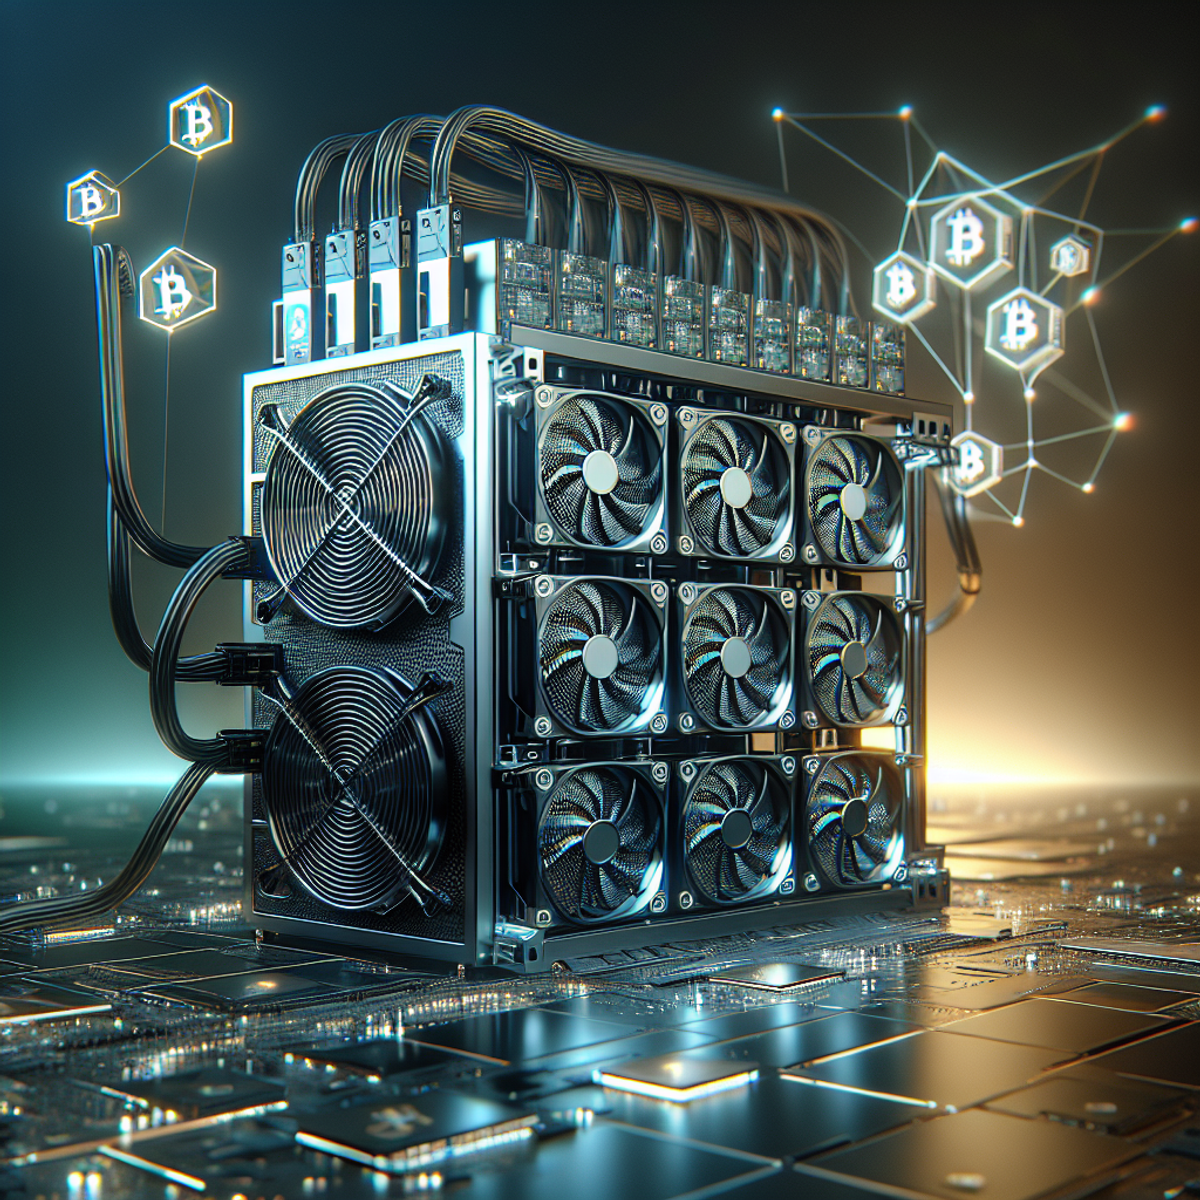 A futuristic mining rig with powerful processors and graphics cards connected to a web of blockchain nodes, symbolizing the efficiency and potential of bitcoin and crypto mining in 2024.